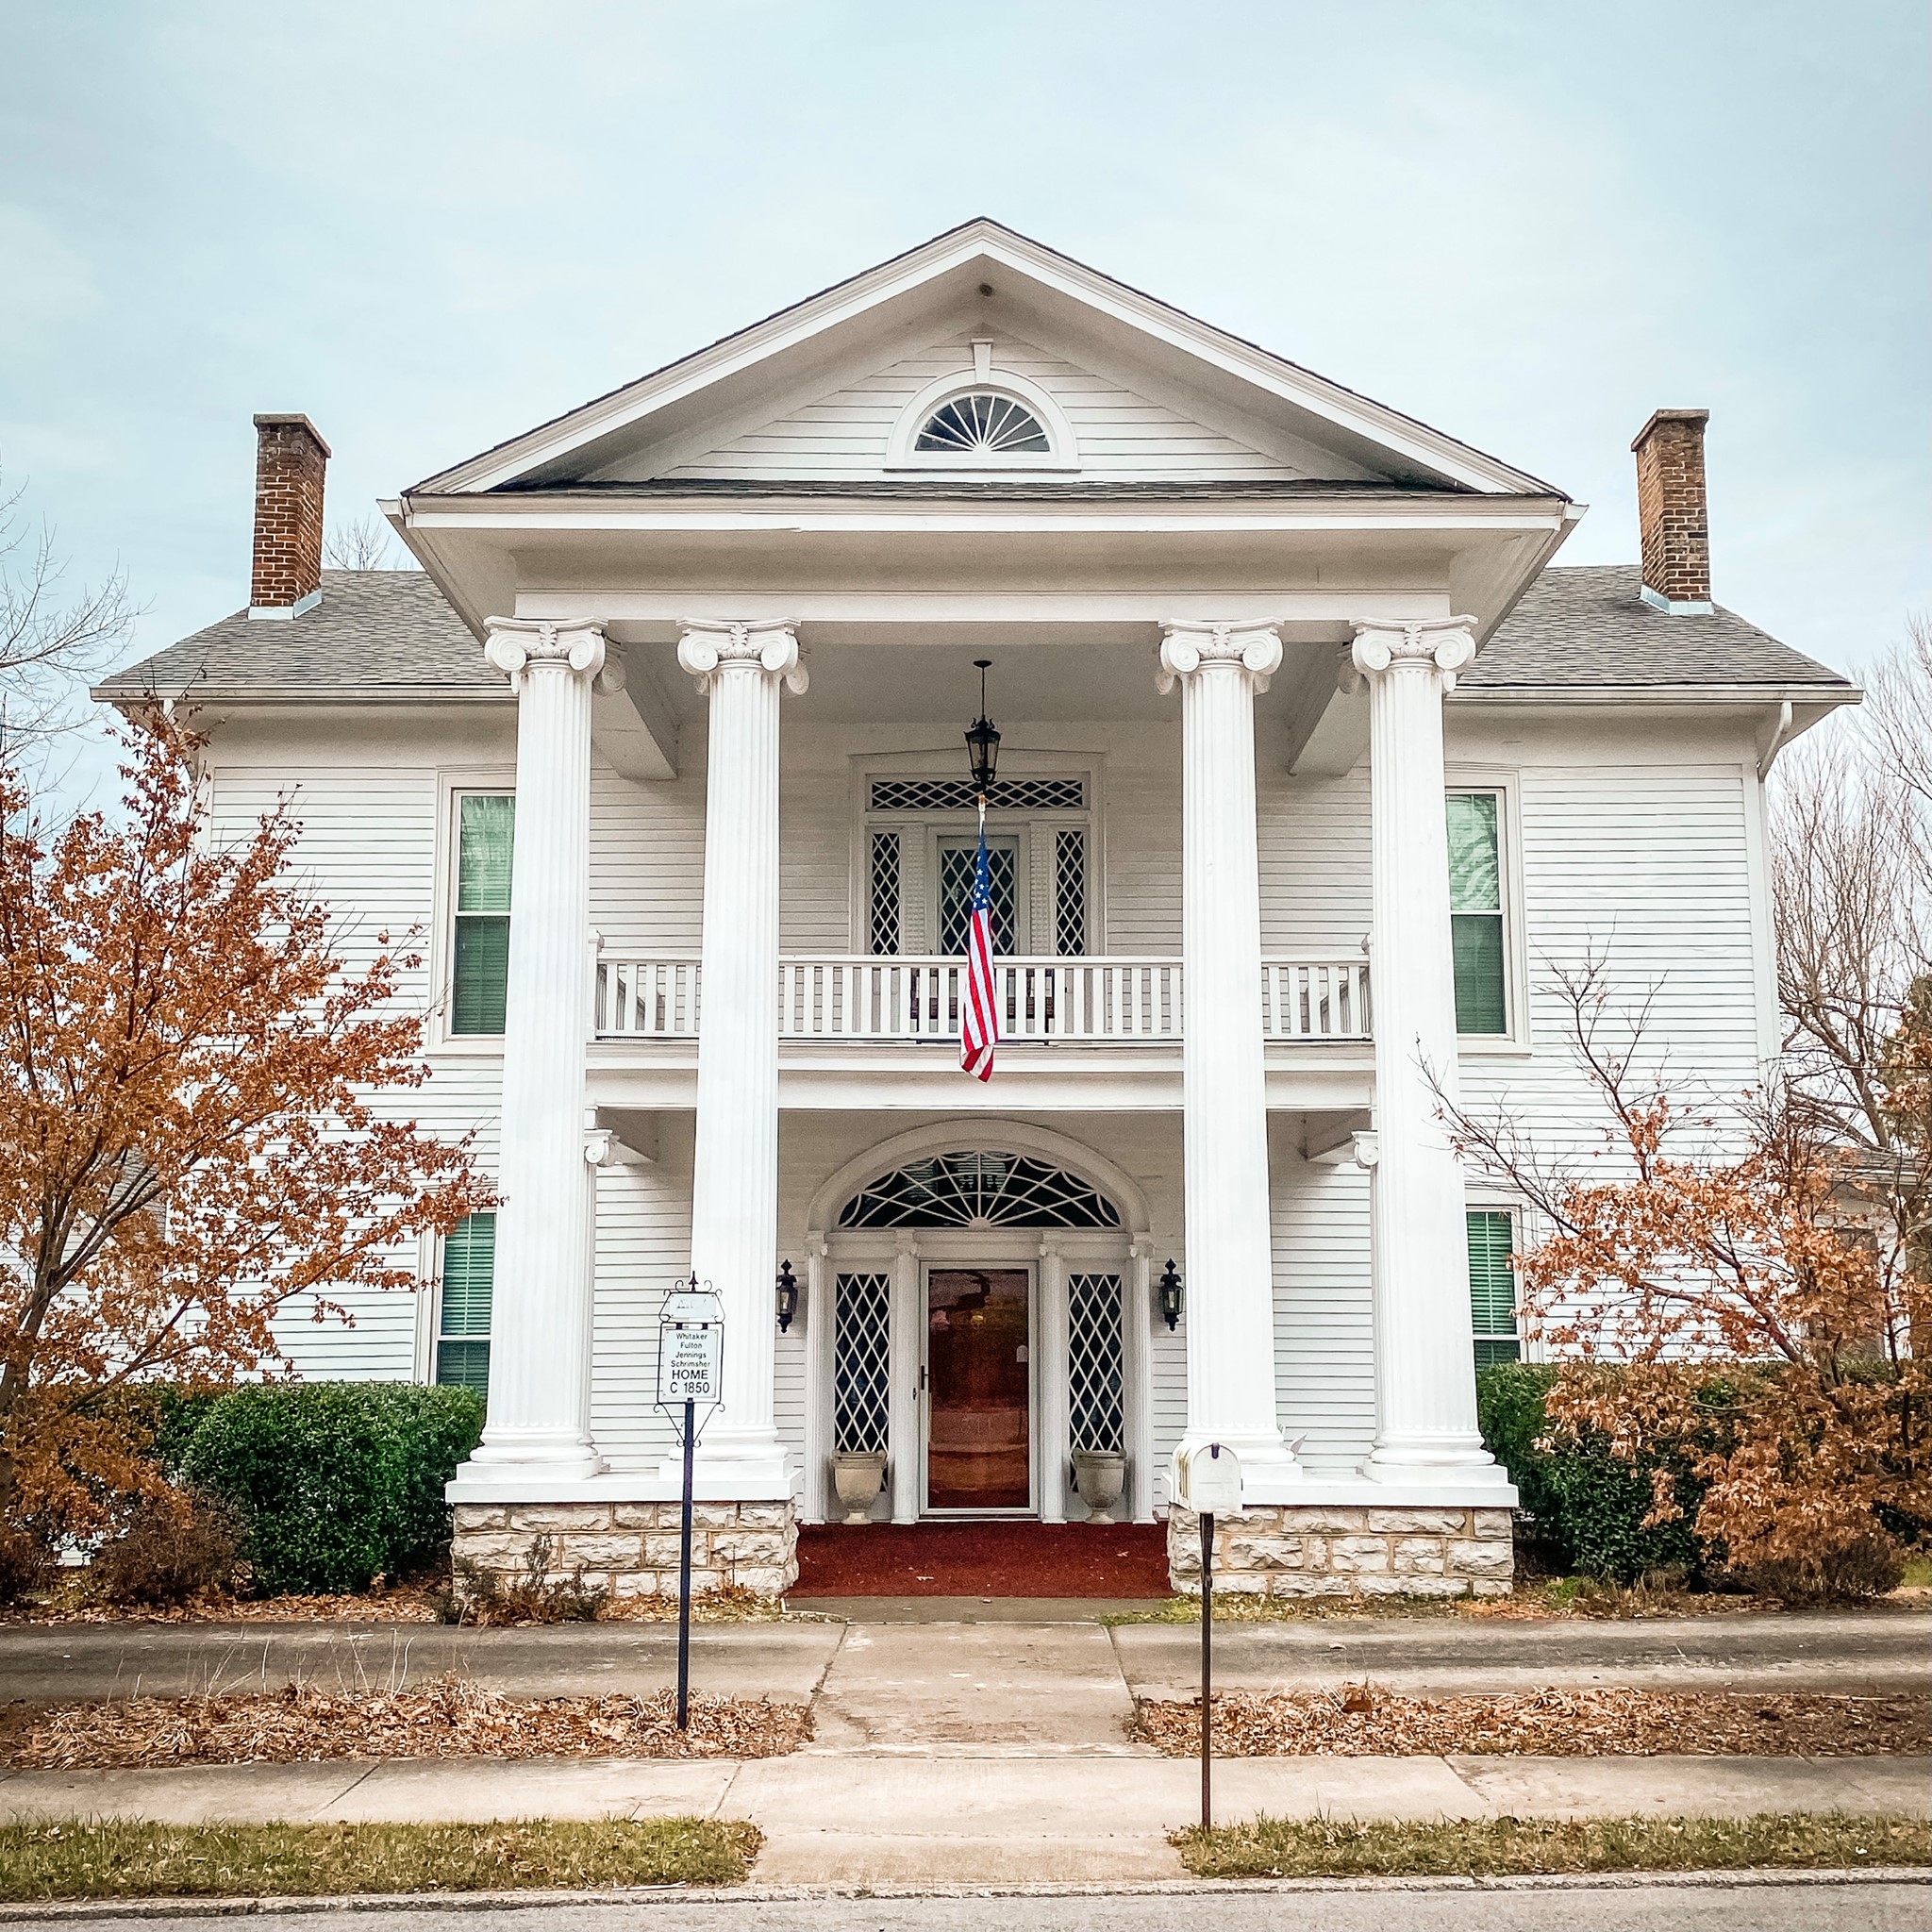 Classical Revival in Fayetteville